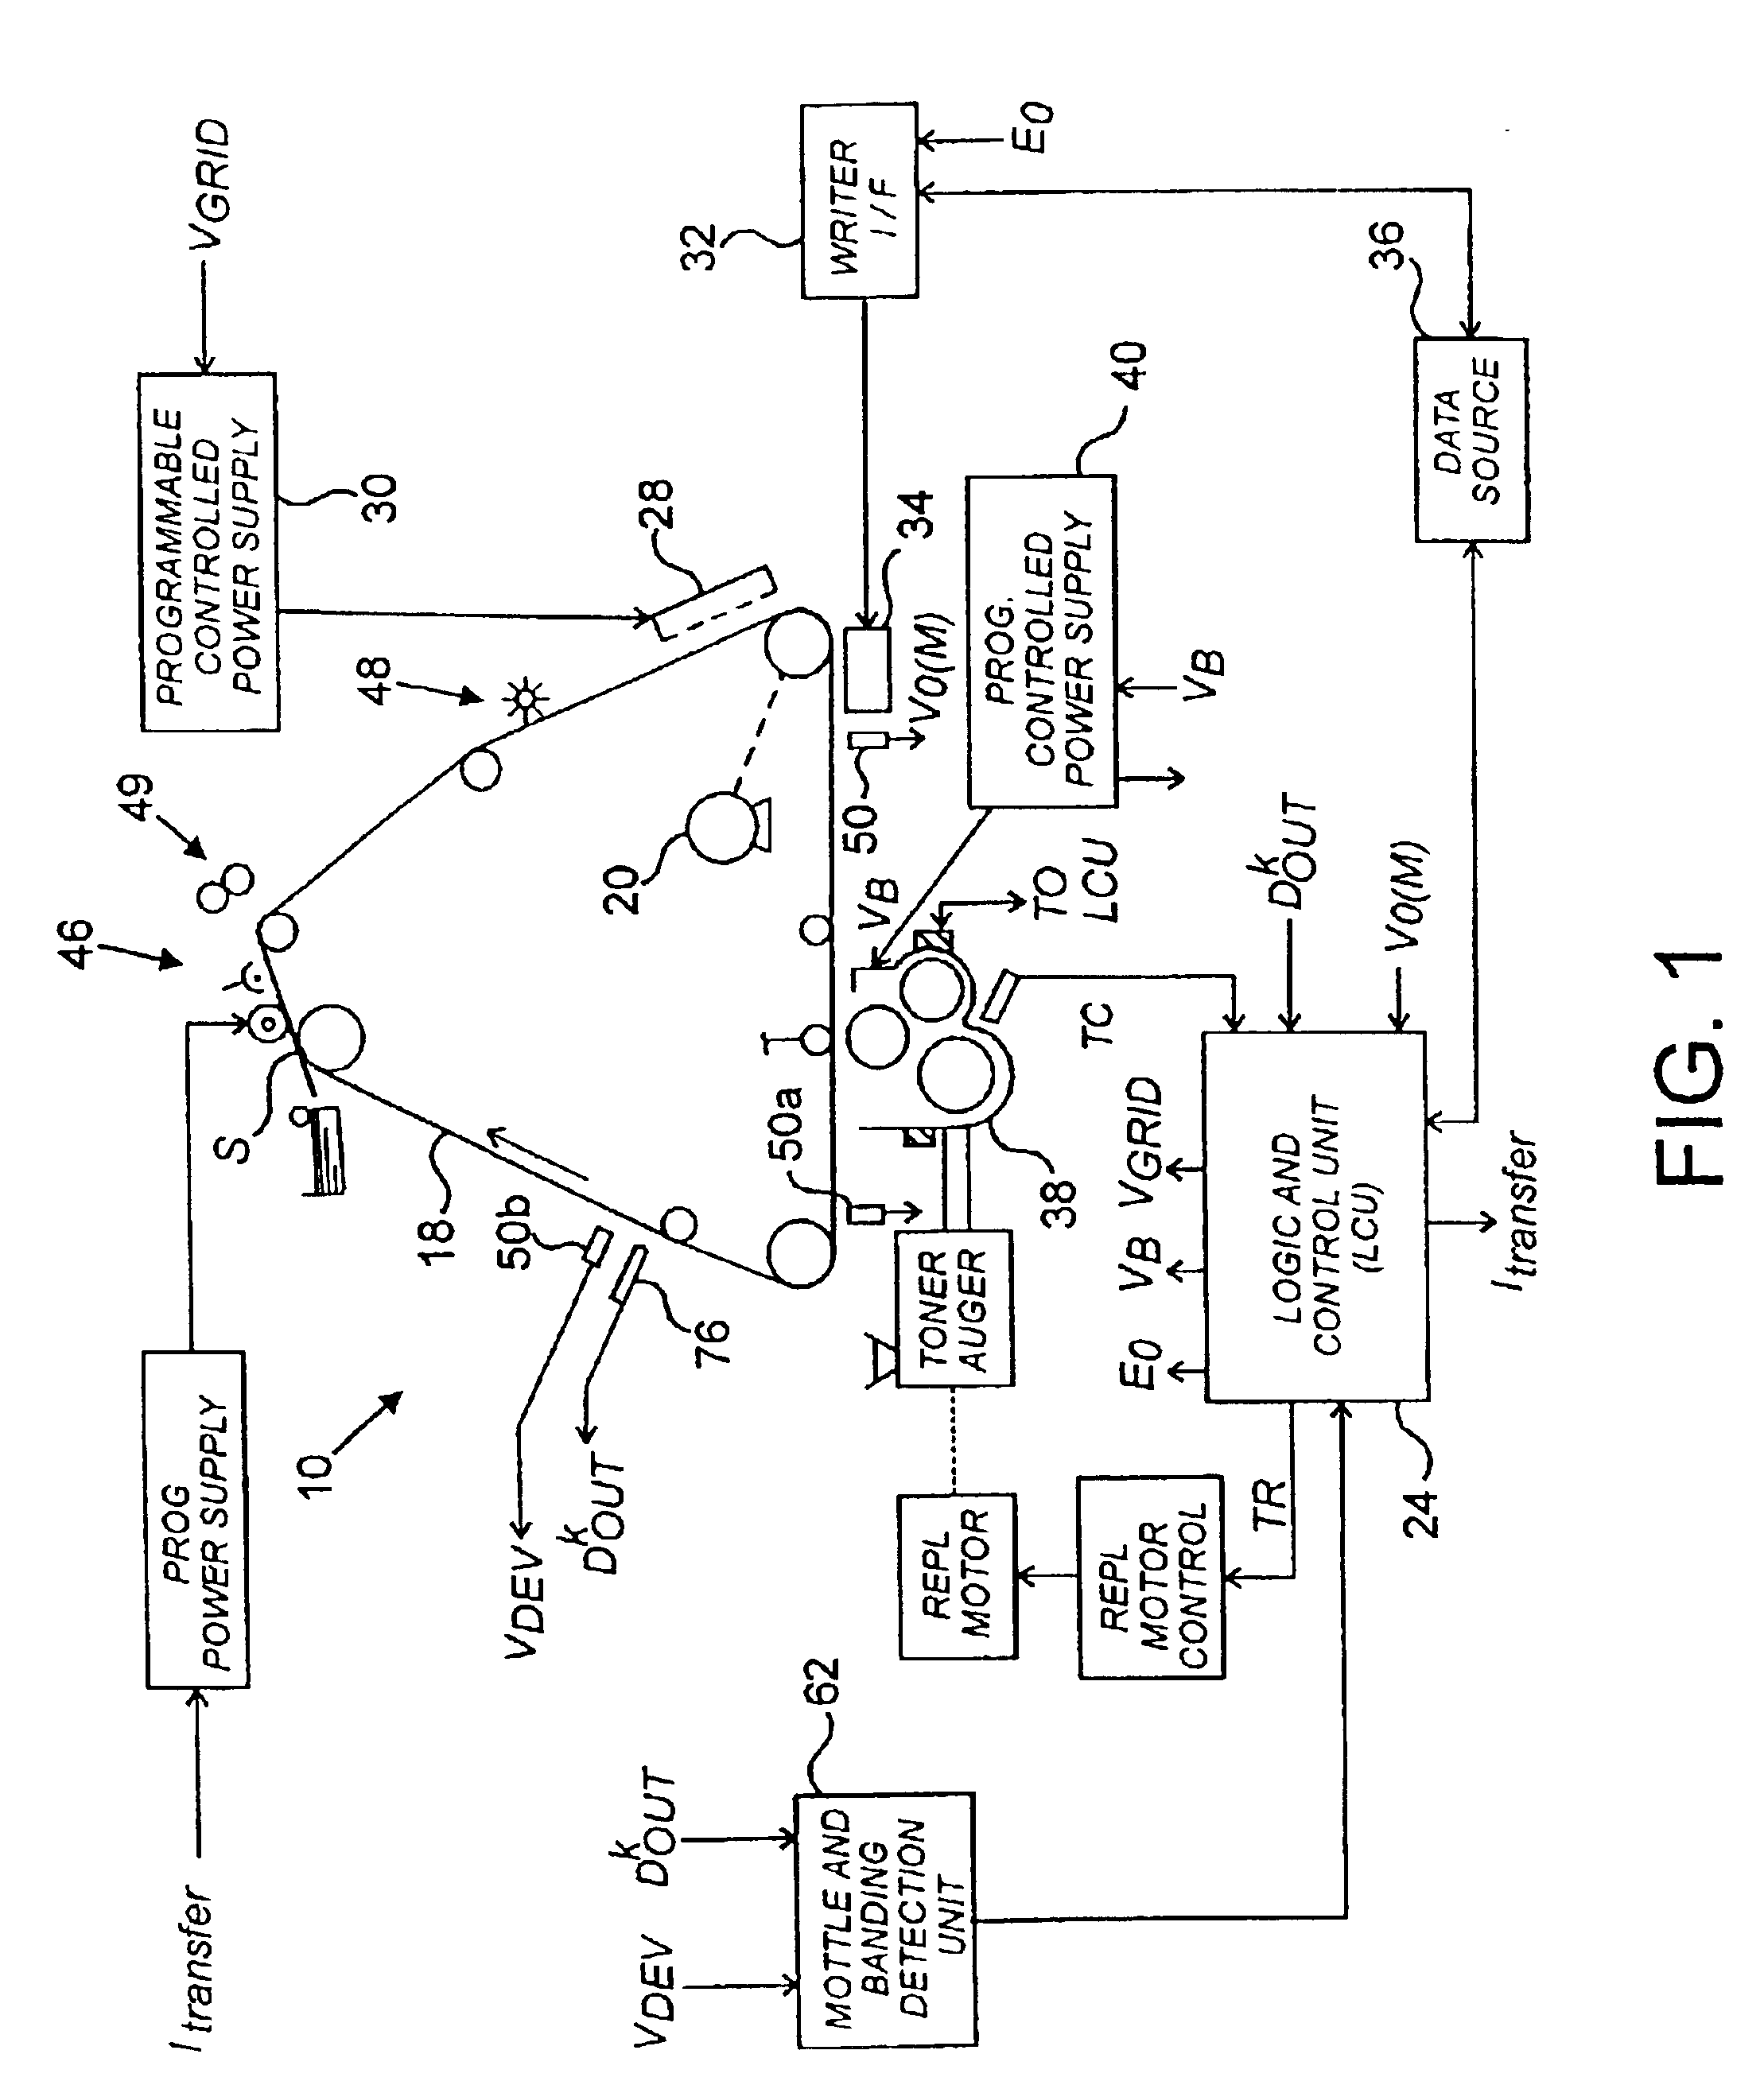 Reduction of banding and mottle in electrophotographic systems